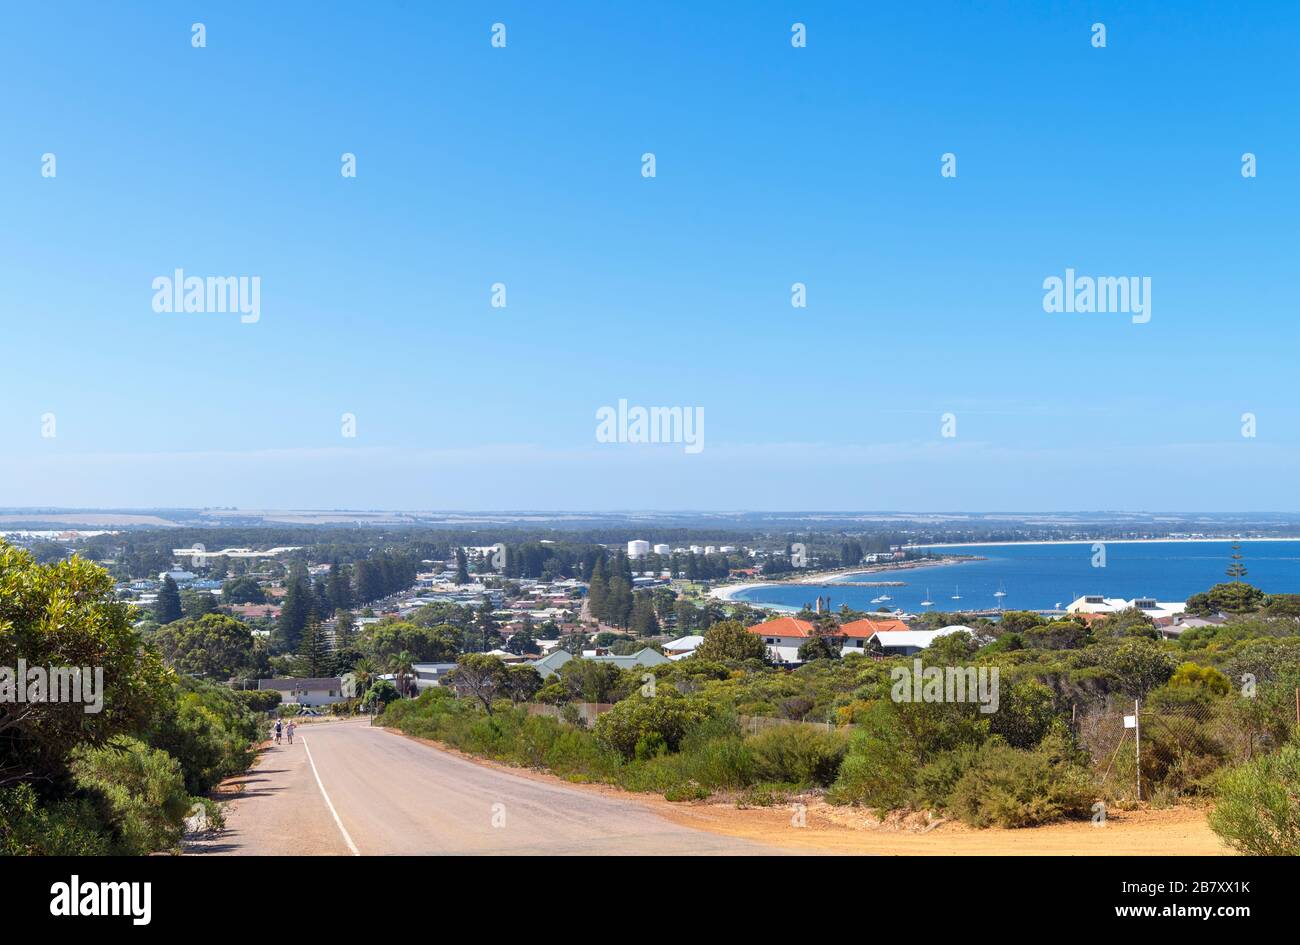 View over the town of Esperance from the Rotary Lookout, Great Ocean Drive, Western Australia, Australia Stock Photo